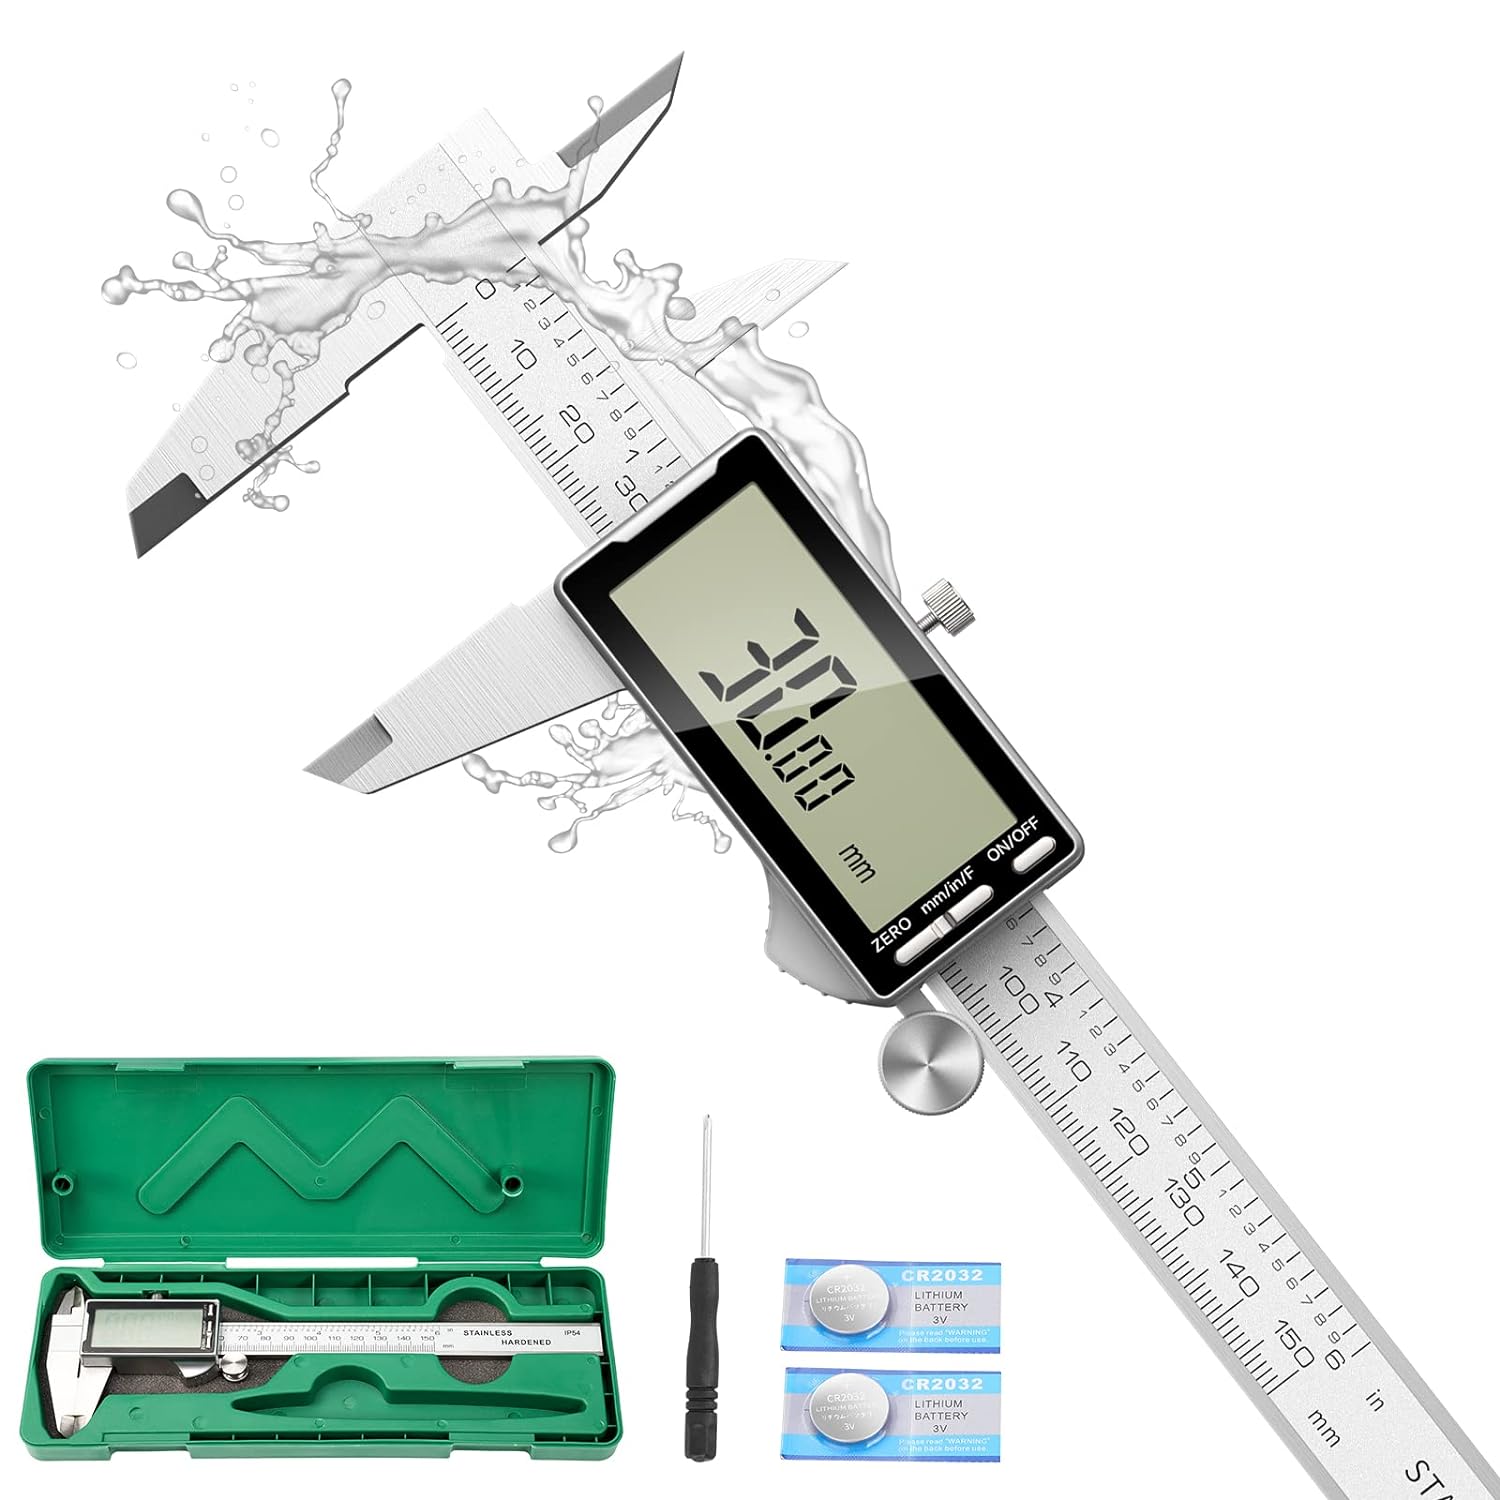 Digital Caliper 12 Inch with Large LCD Screen, Inch/MM/Fraction Conversion, 300mm Micrometer Caliper All Stainless Steel Diameter Measuring Tool for Jewelers/Woodworkers/DIY